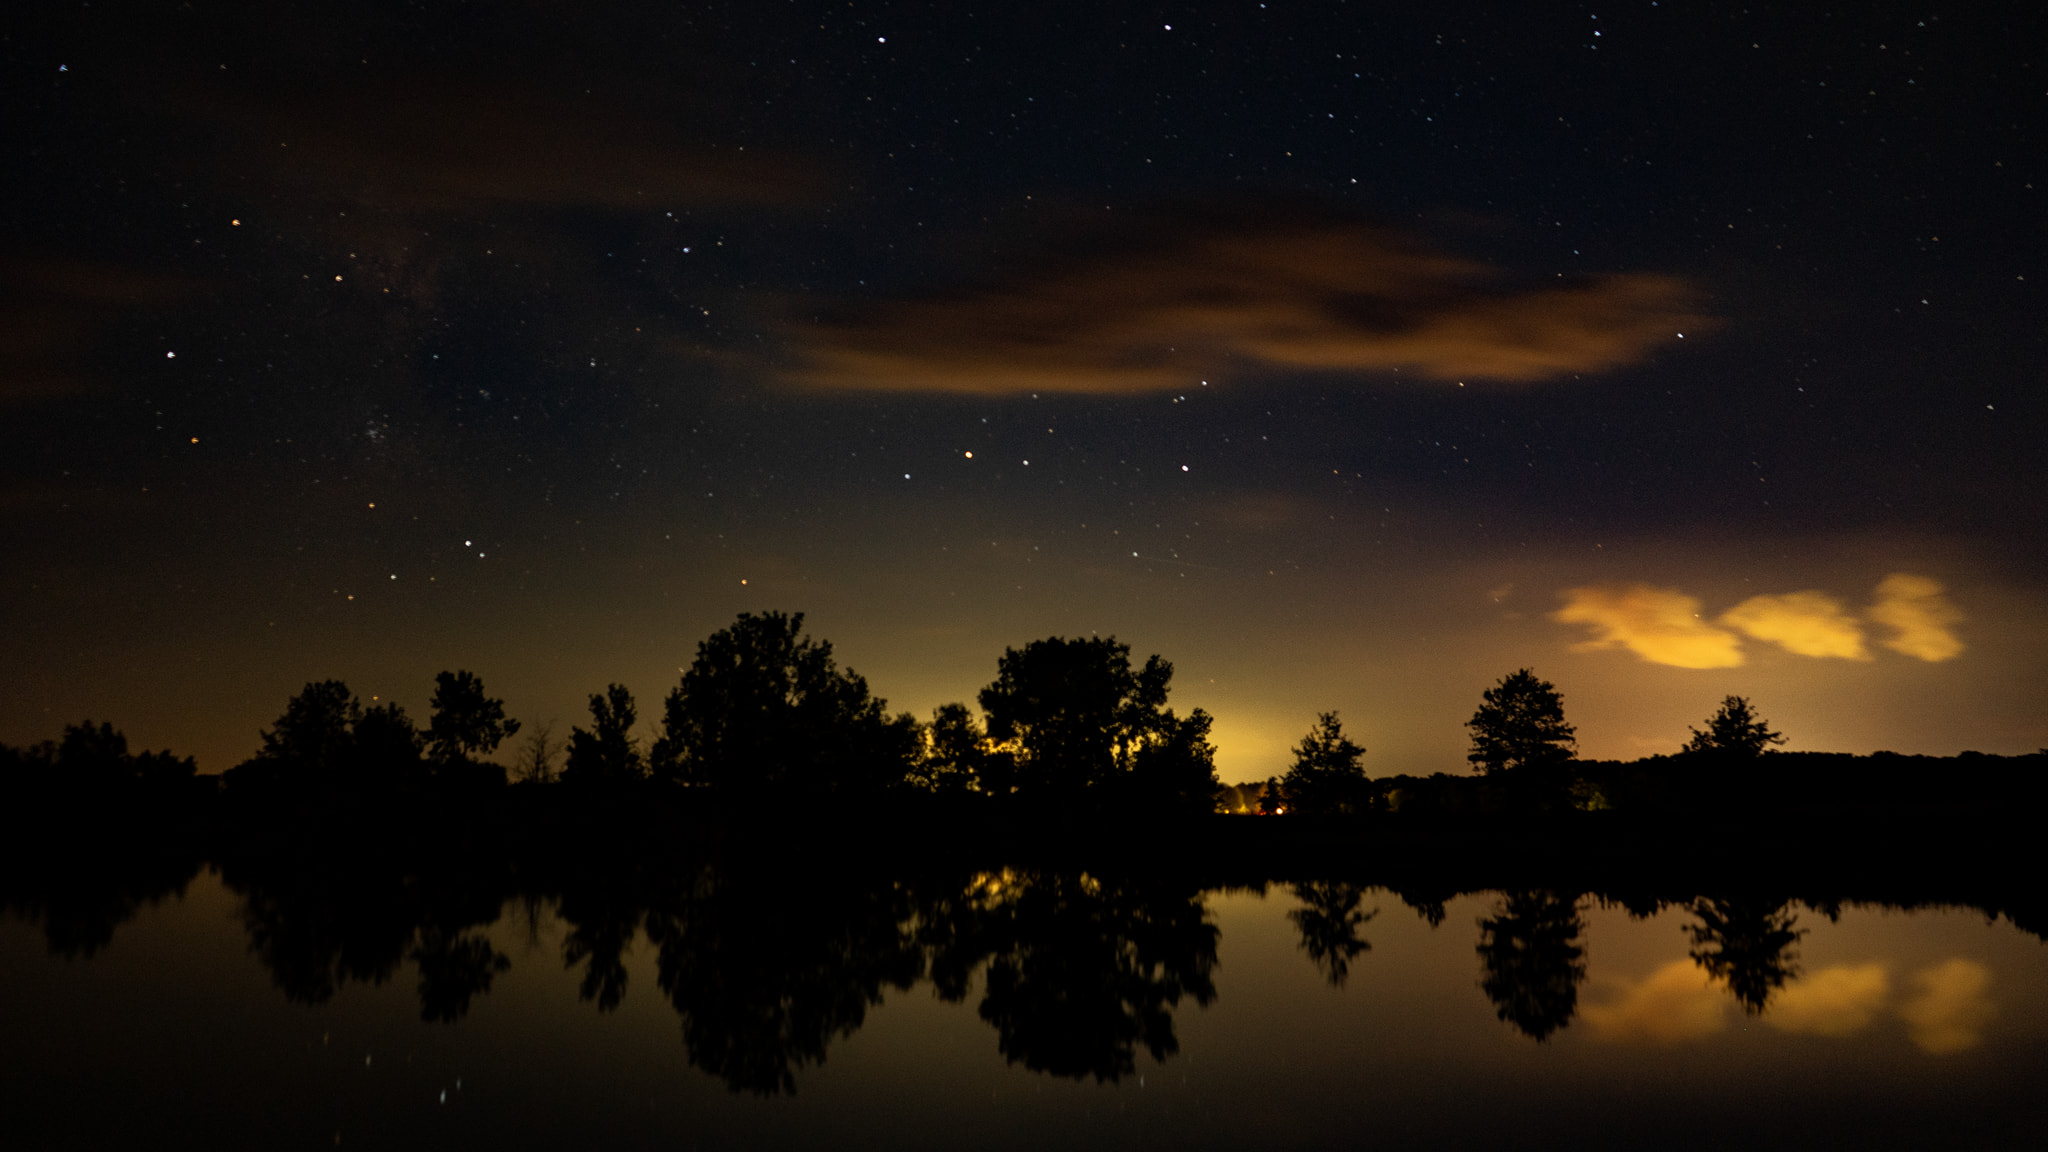 A night sky with trees in the distance